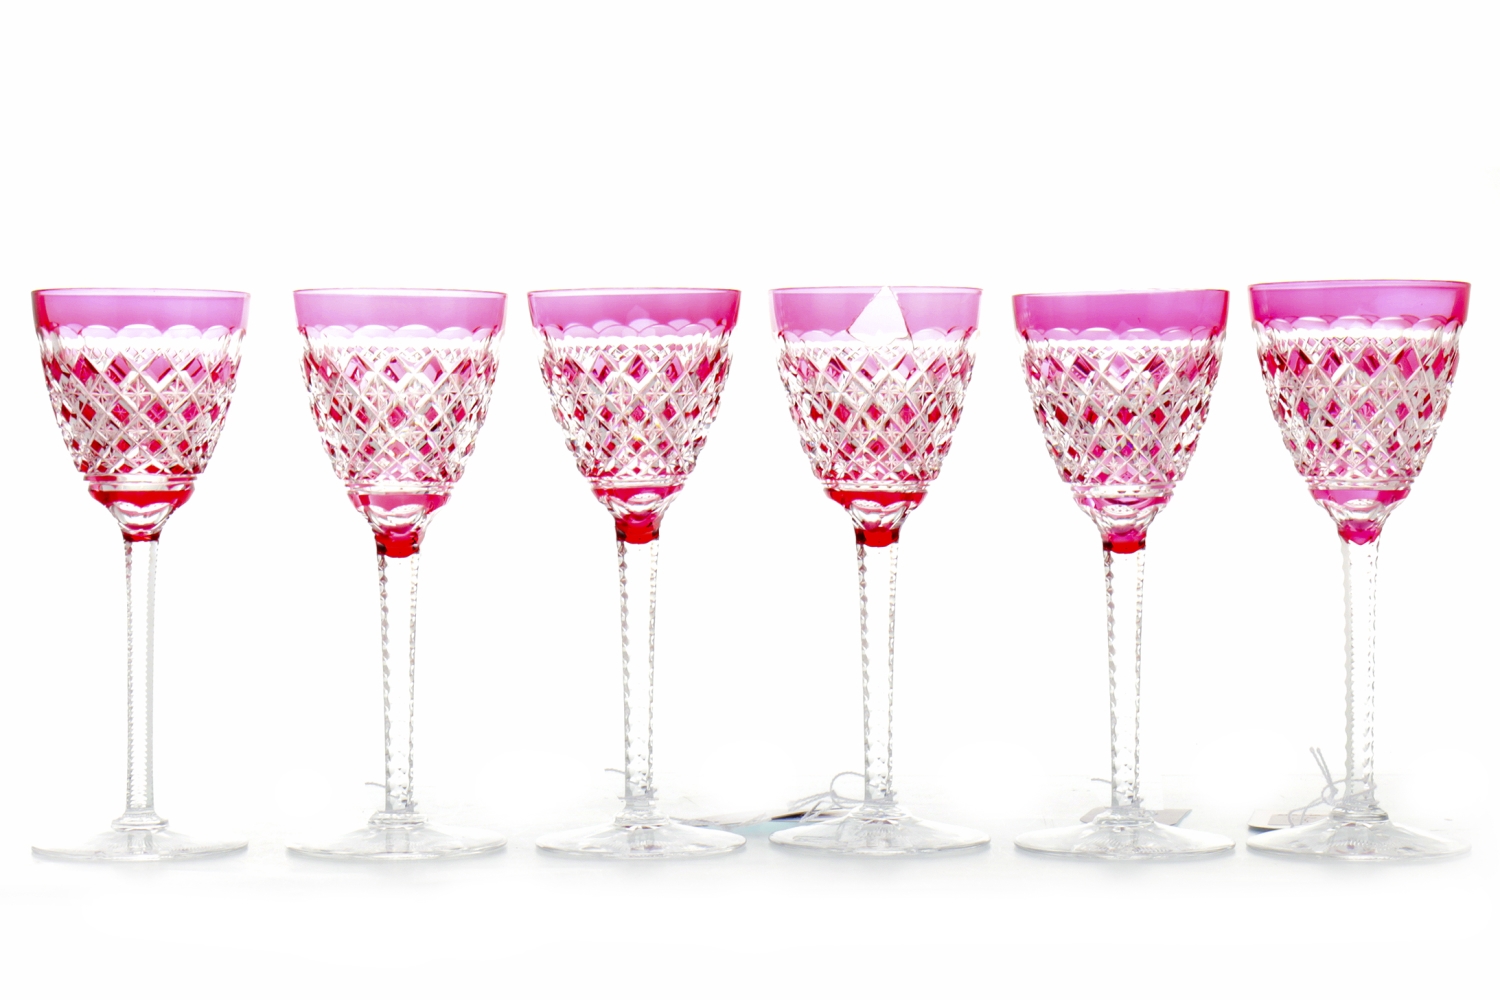 SET OF SIX CRANBERRY FLASHED WINE GLASSES each with diamond cut and faceted, flared bowl, - Image 2 of 2